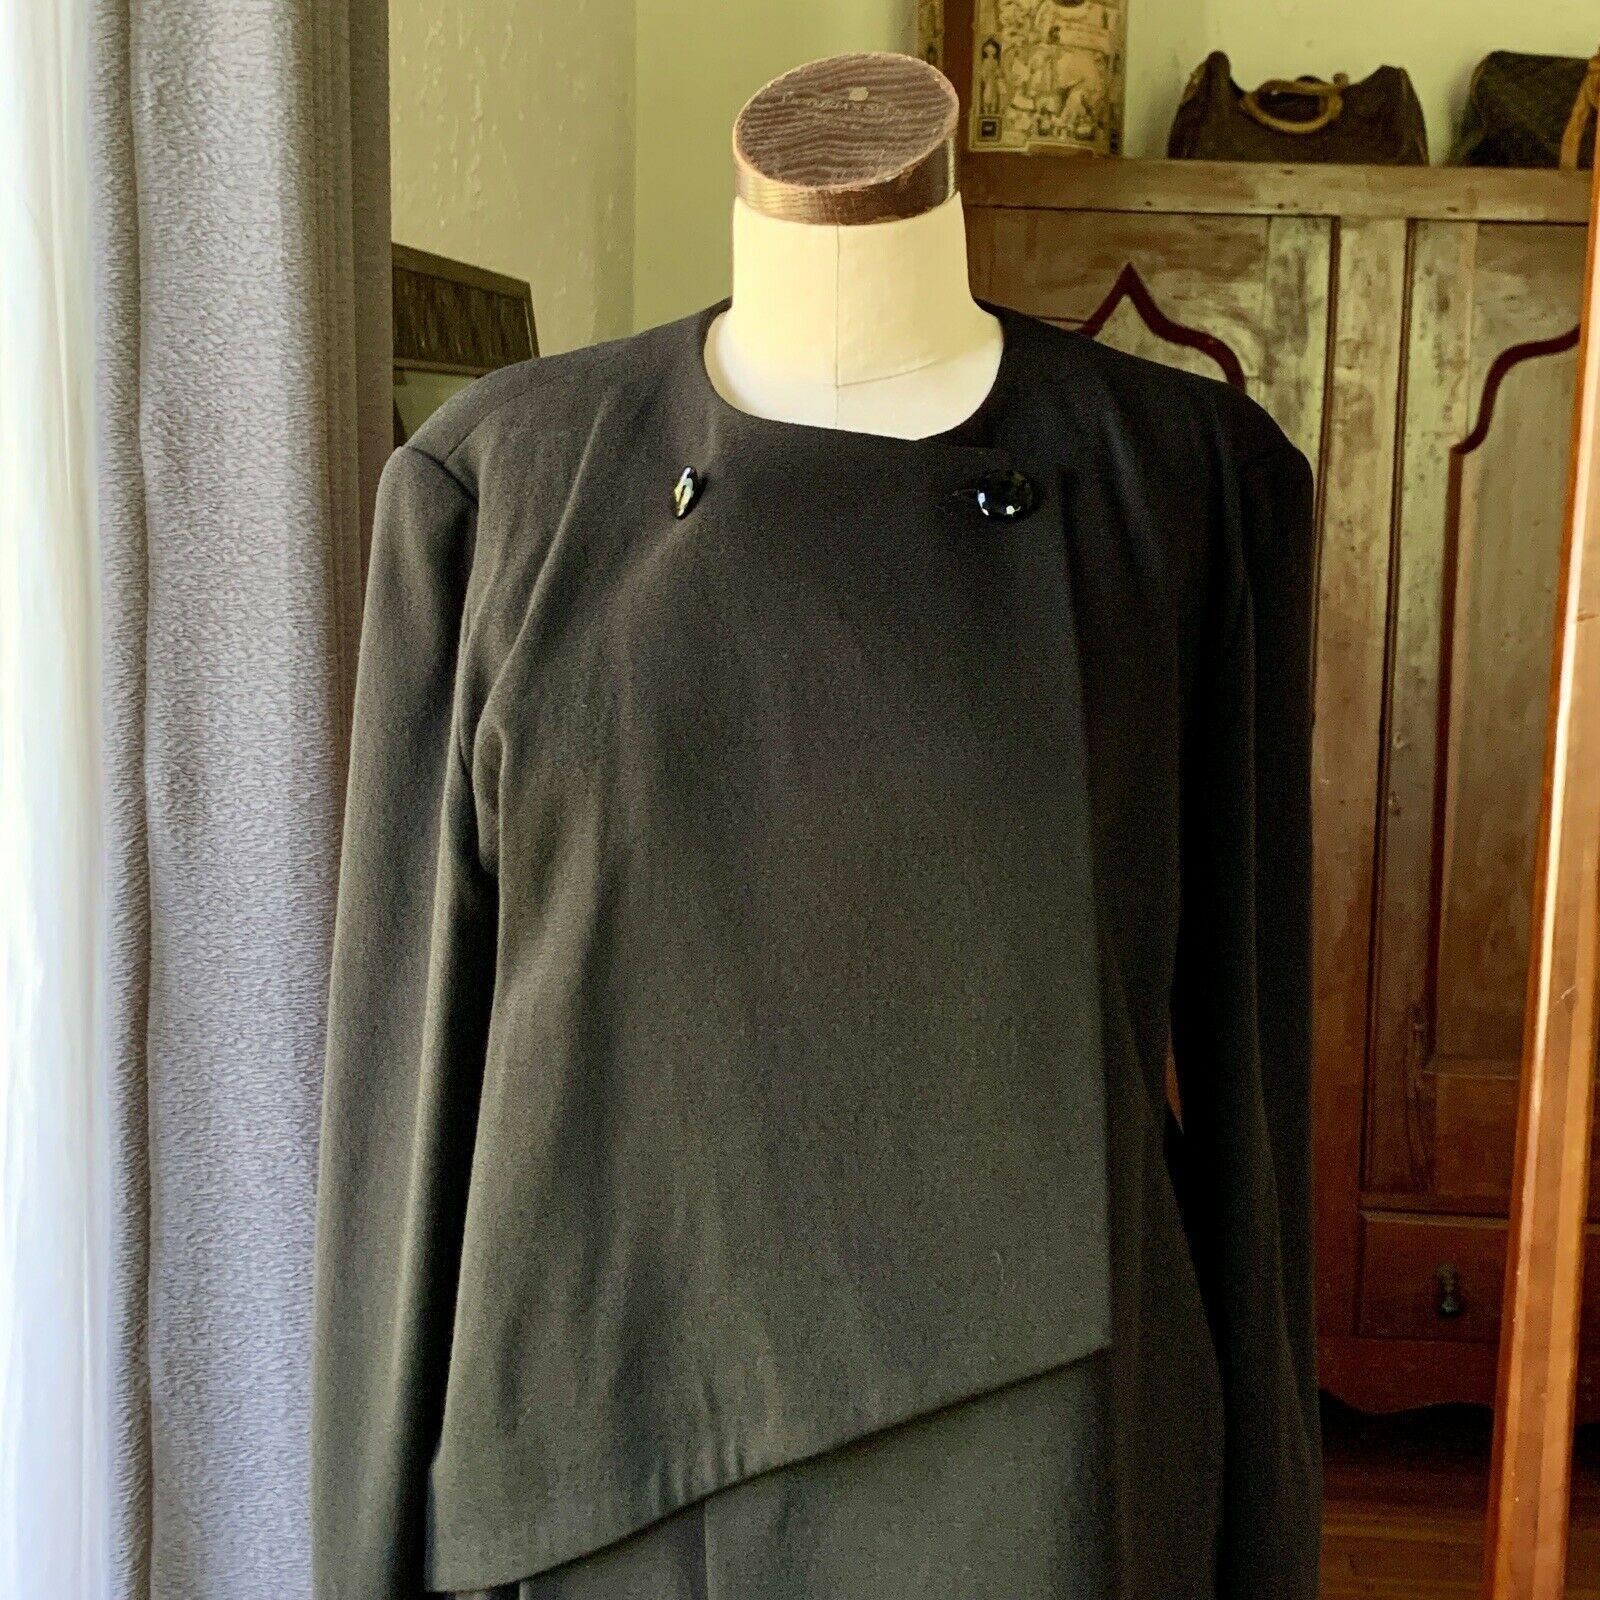 Pierre Cardin, 100% Wool, 1960's Couture, Made in France, Asymmetrical Layered Design, Two Faceted Buttons, Pleated Skirt, Metal Zipper, Slit on Back of Skirt, Vintage 38

Measurements Laying Flat

Bust up to 22